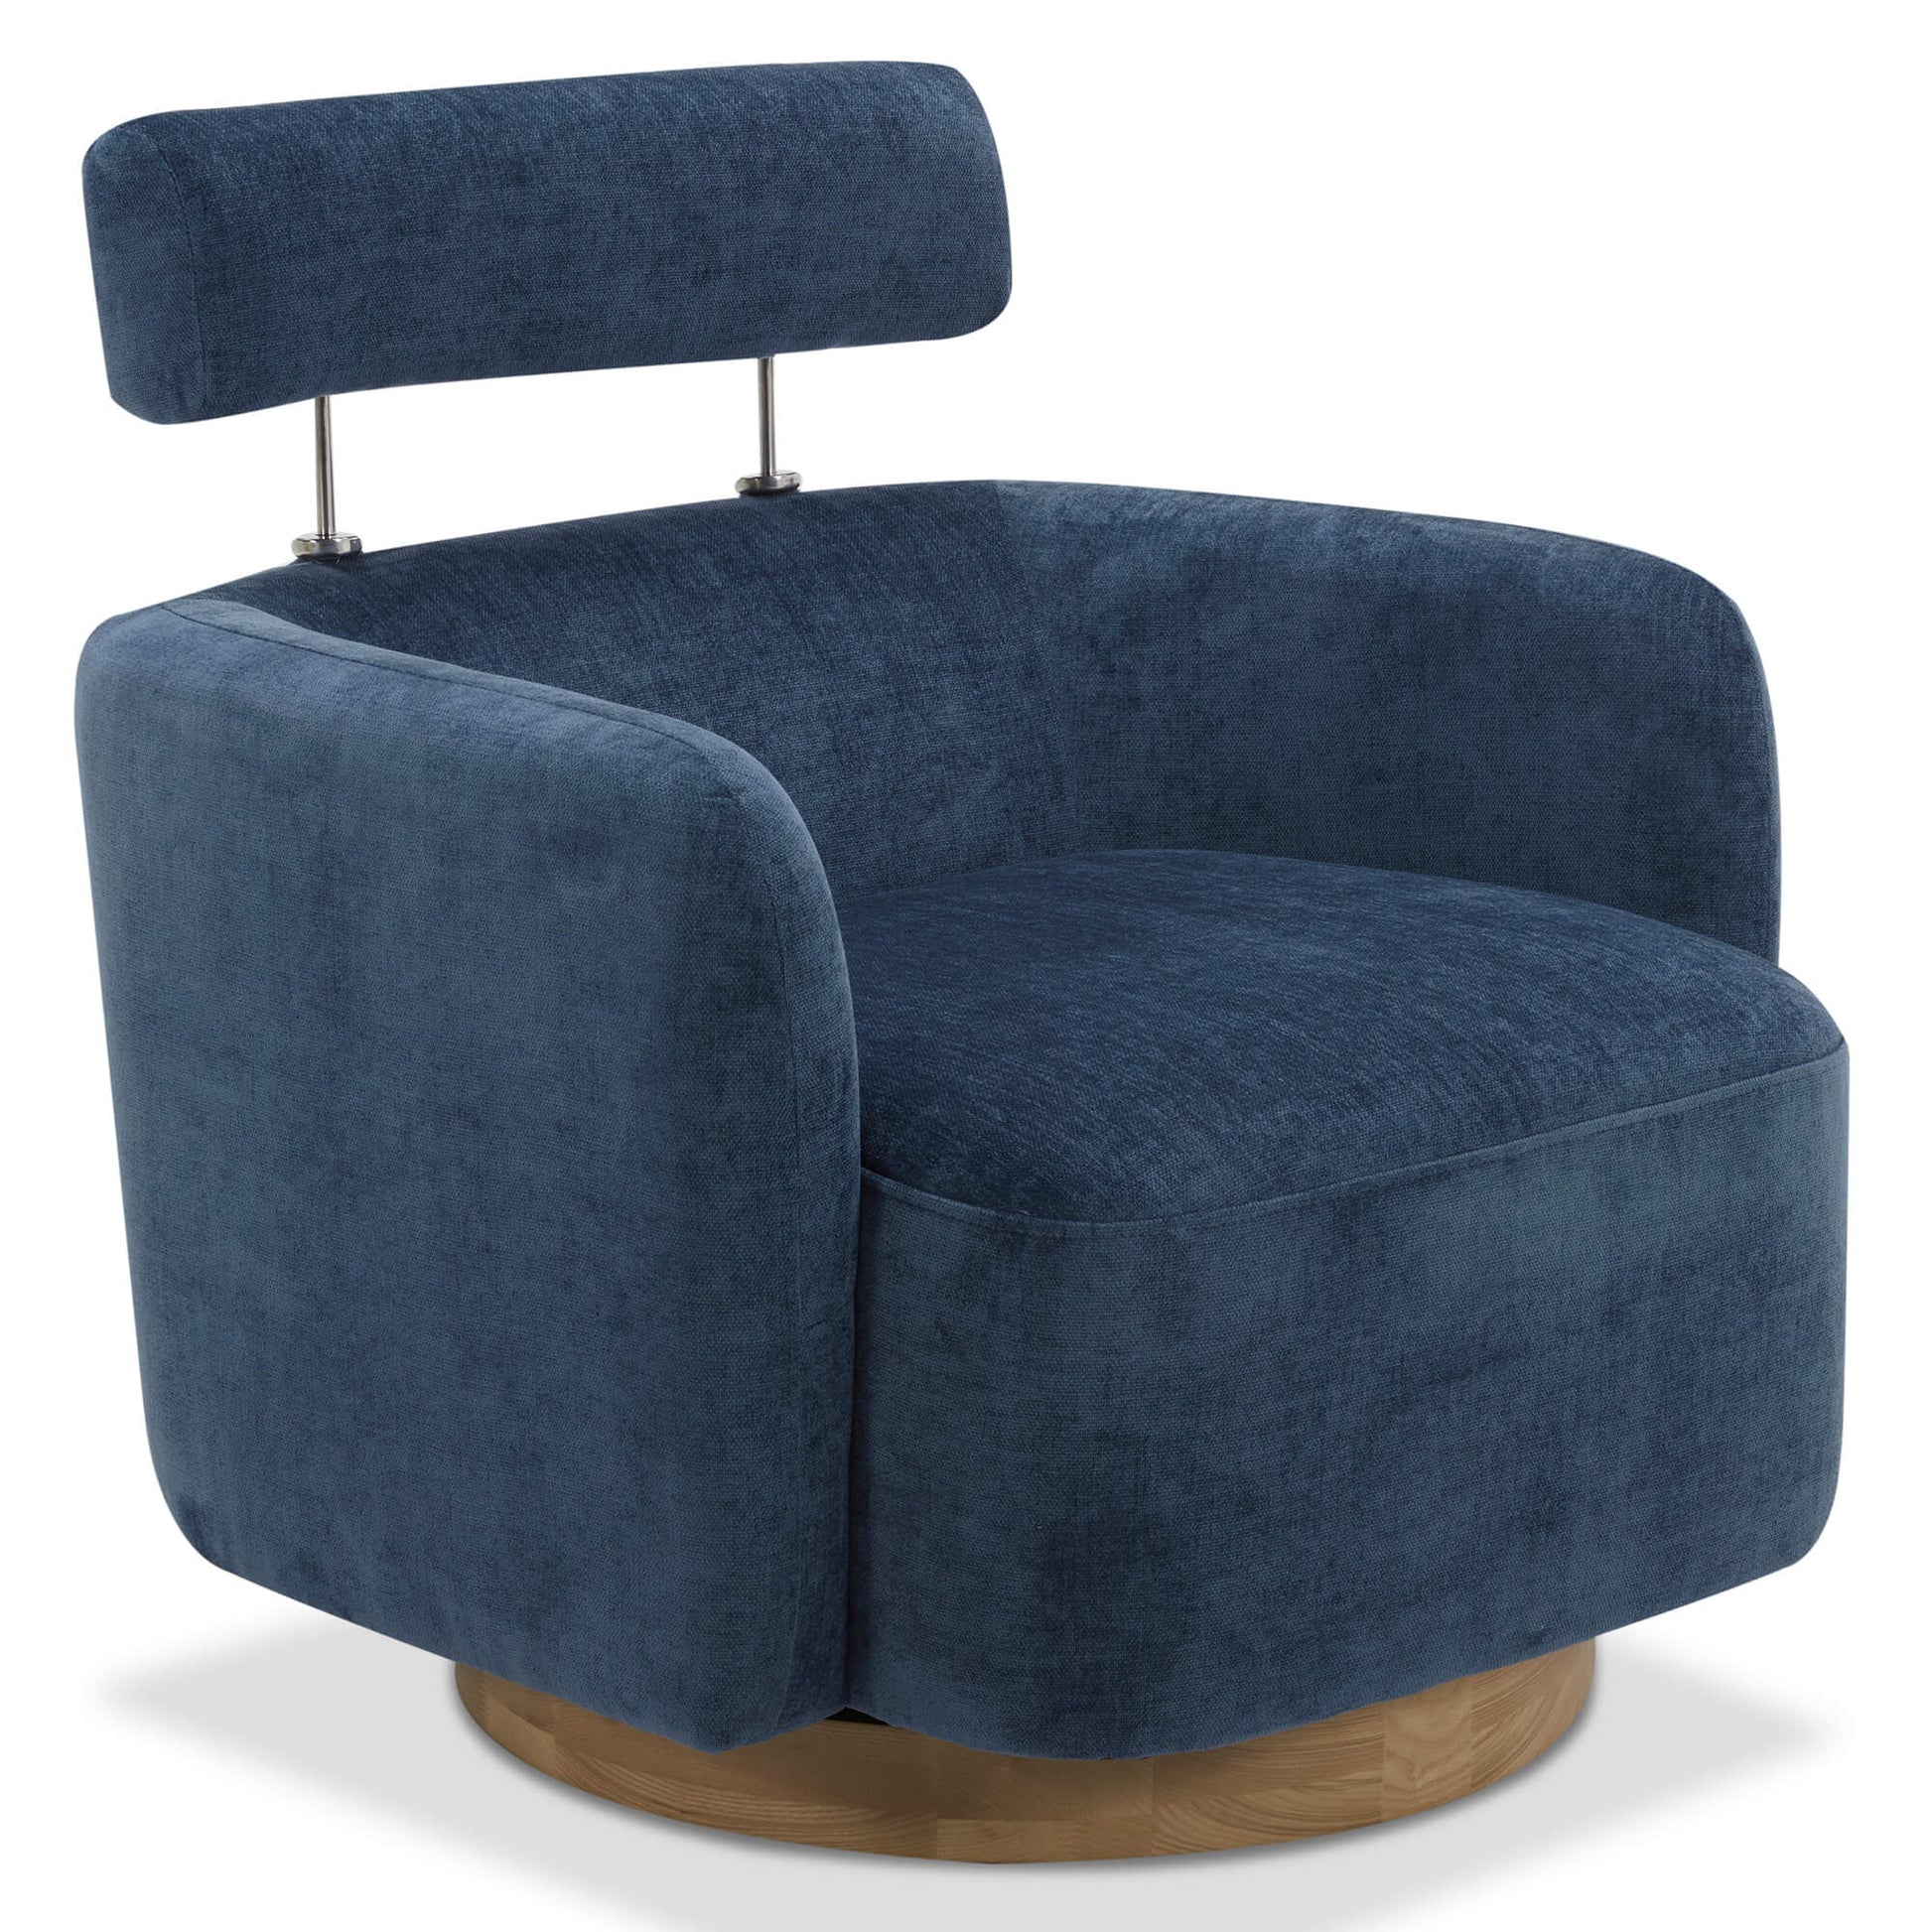 CHITA LIVING-Luna Swivel Accent Chair With Adjustable Backrest-Accent Chair-Fabric-Blue-